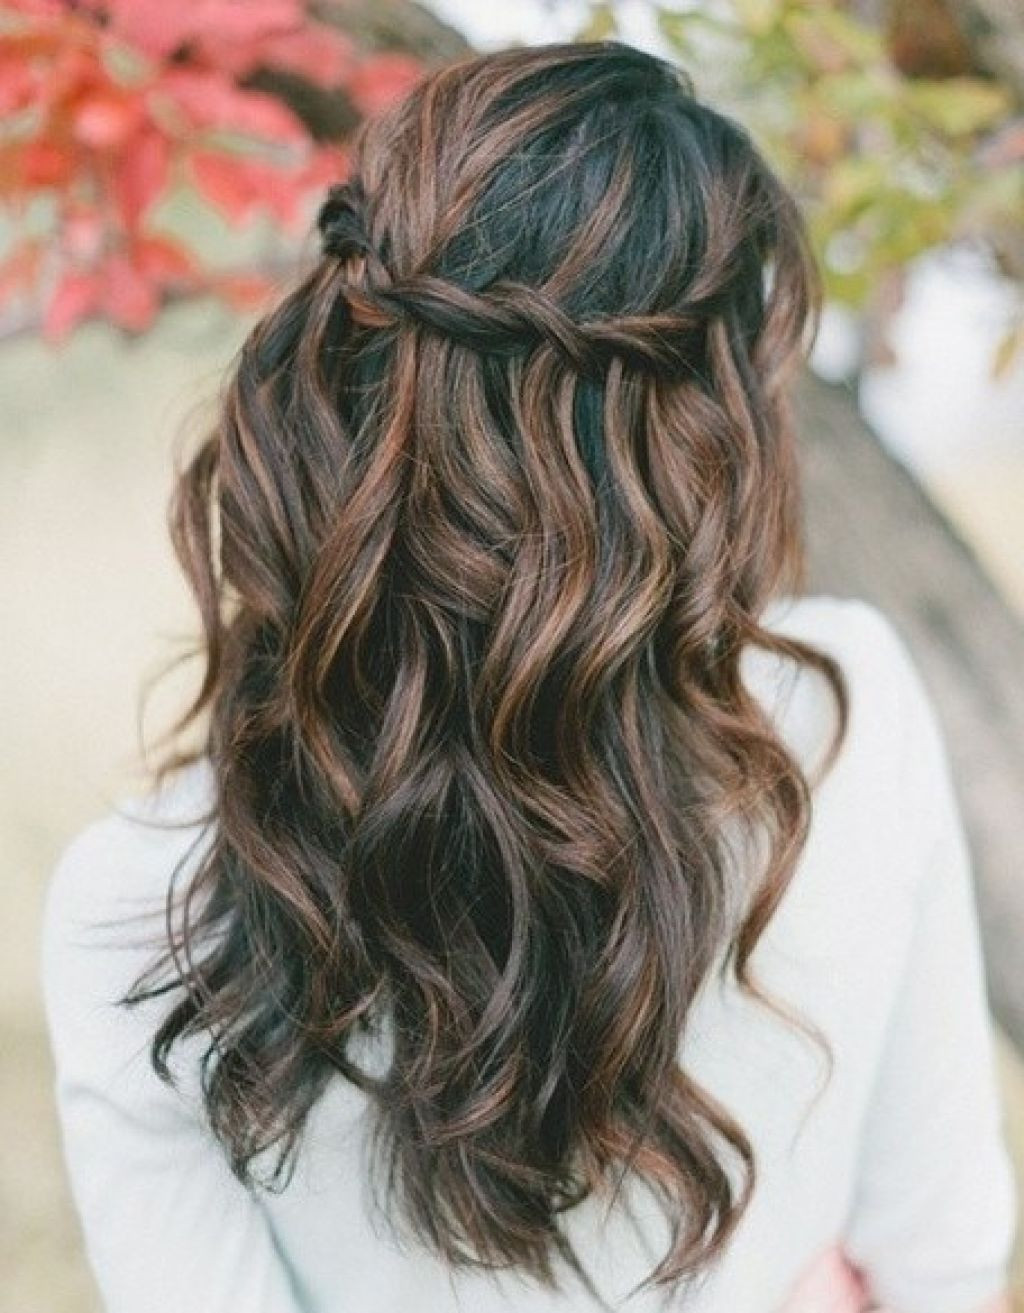 Prom Hairstyle Curls
 59 Prom Hairstyles To Look The Belle The Ball